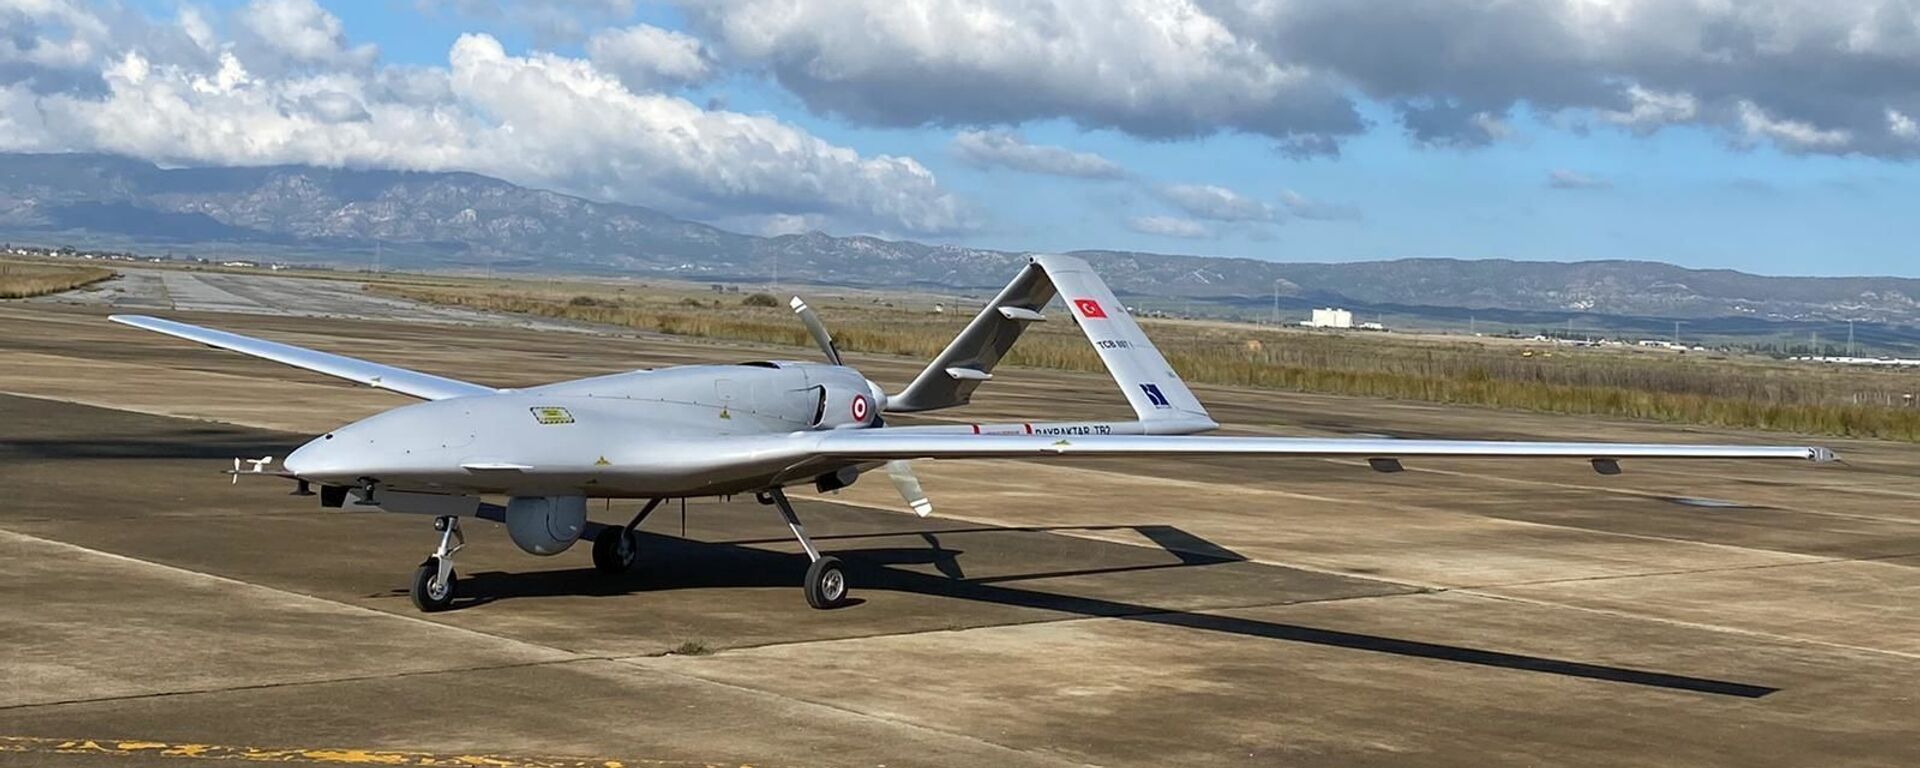 A Turkish-made Bayraktar TB2 drone is seen shortly after its landing at an airport in Gecitkala, known as Lefkoniko in Greek, in Cyprus, Monday, Dec. 16, 2019 - Sputnik International, 1920, 12.03.2022